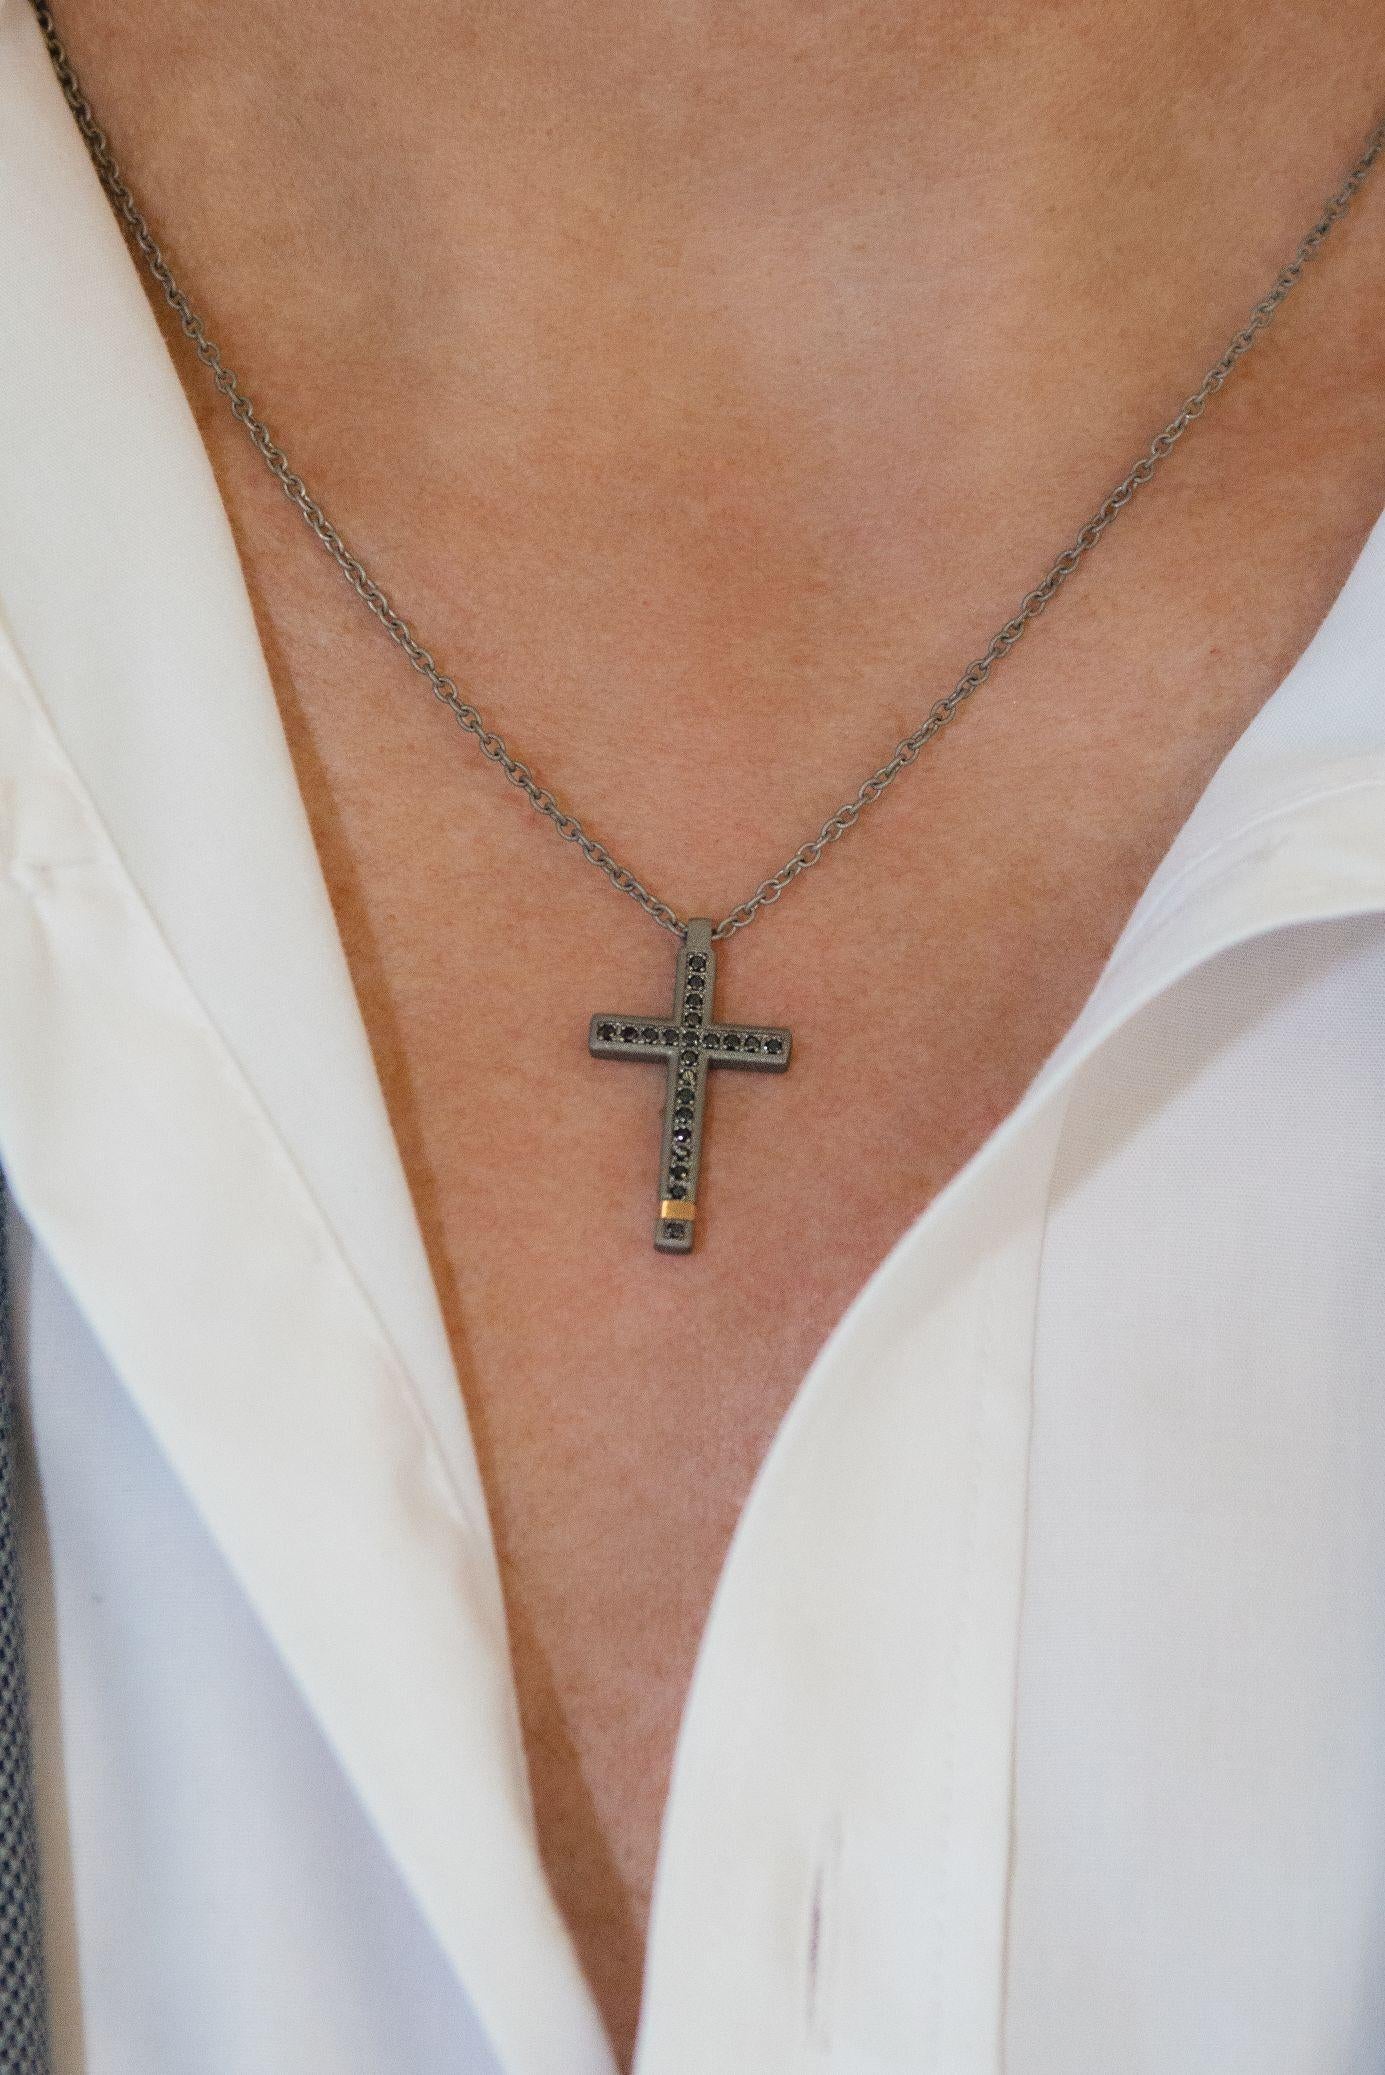 Titanium modern pendant is from our Men’s Collection. The cross pendant is decorated by 22 natural round black diamonds in total of 0.22 Carat and with a 18K rose gold detail. The size of the cross is 3cm x 1.5 cm. The chain is 54cm long. Perfect